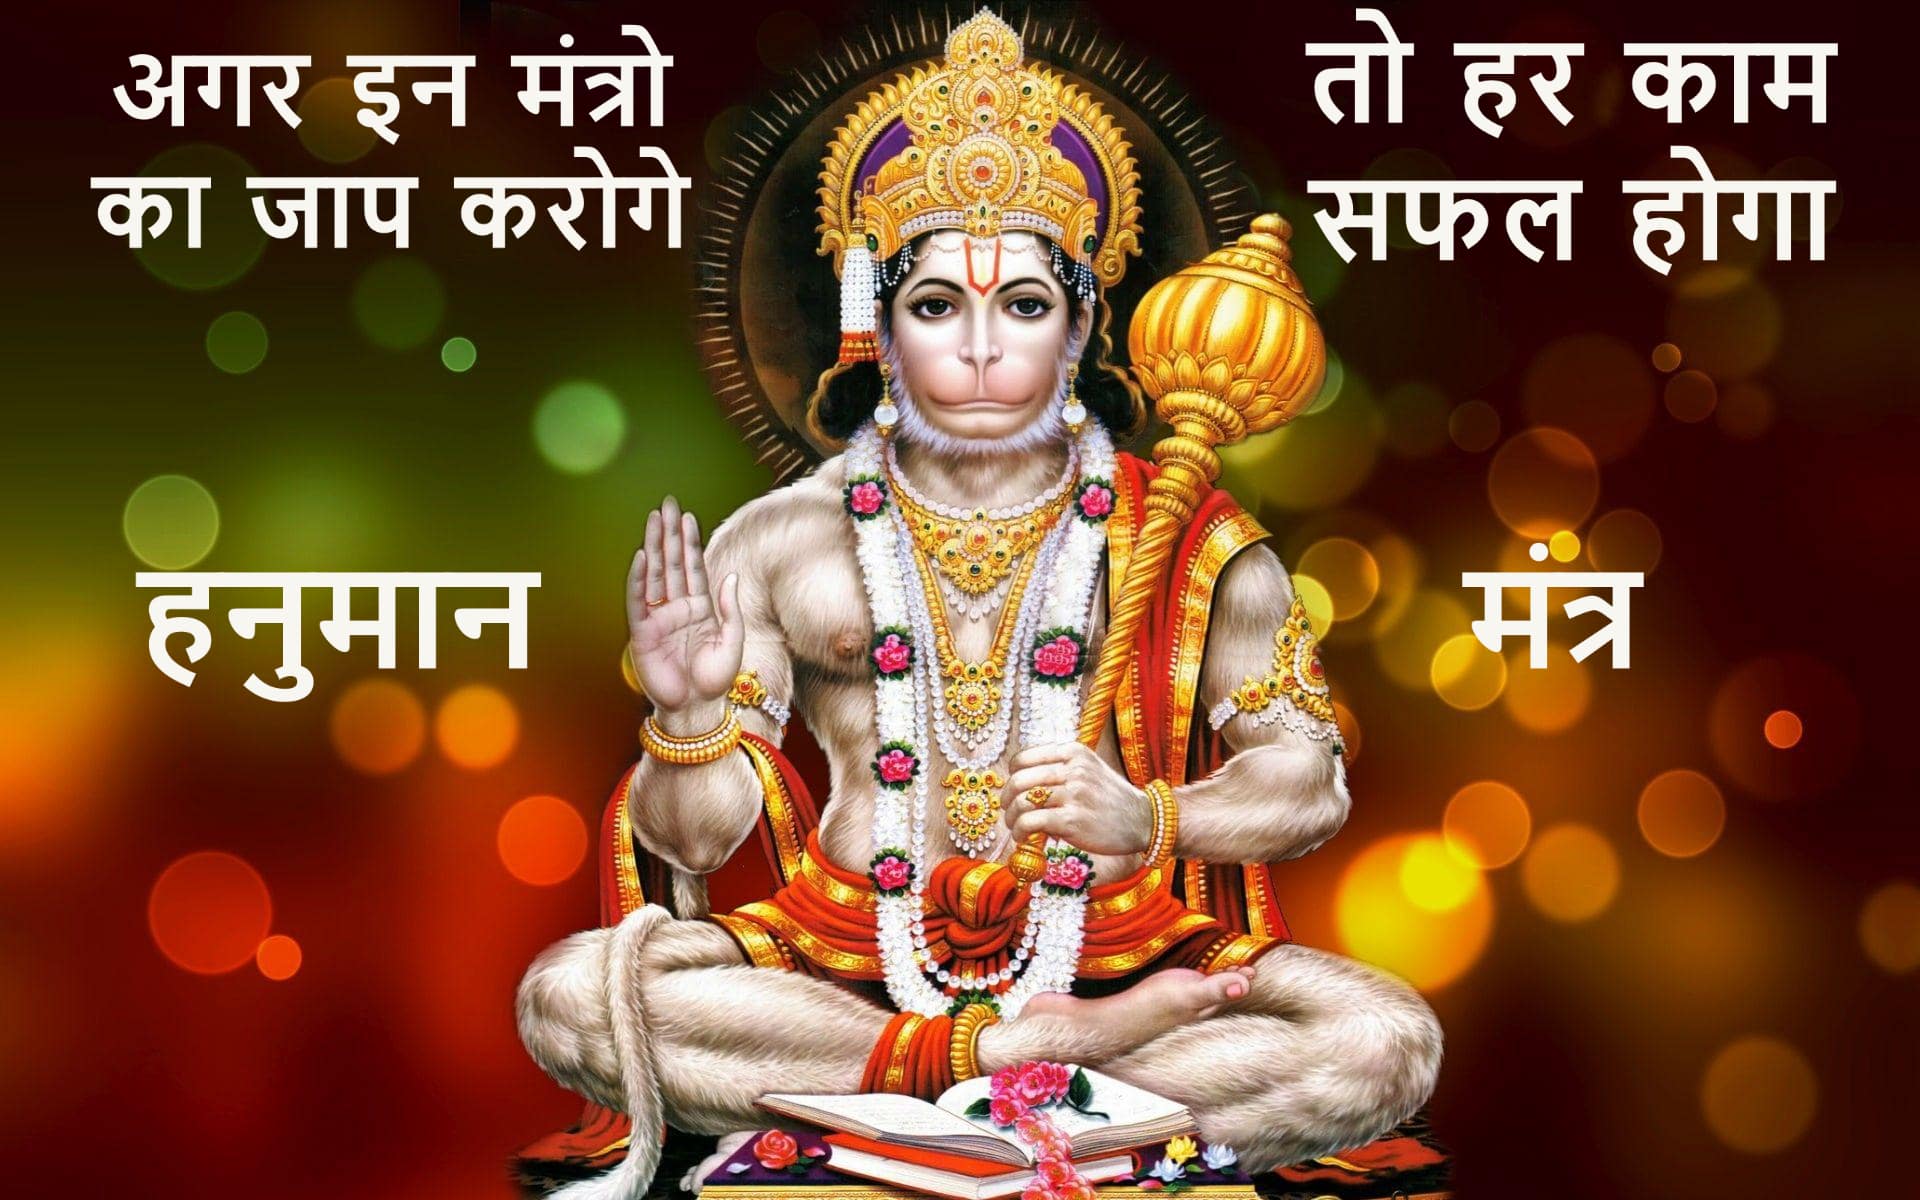 To save life from every crisis, do these surefire mantras of Hanuman ji on Tuesday